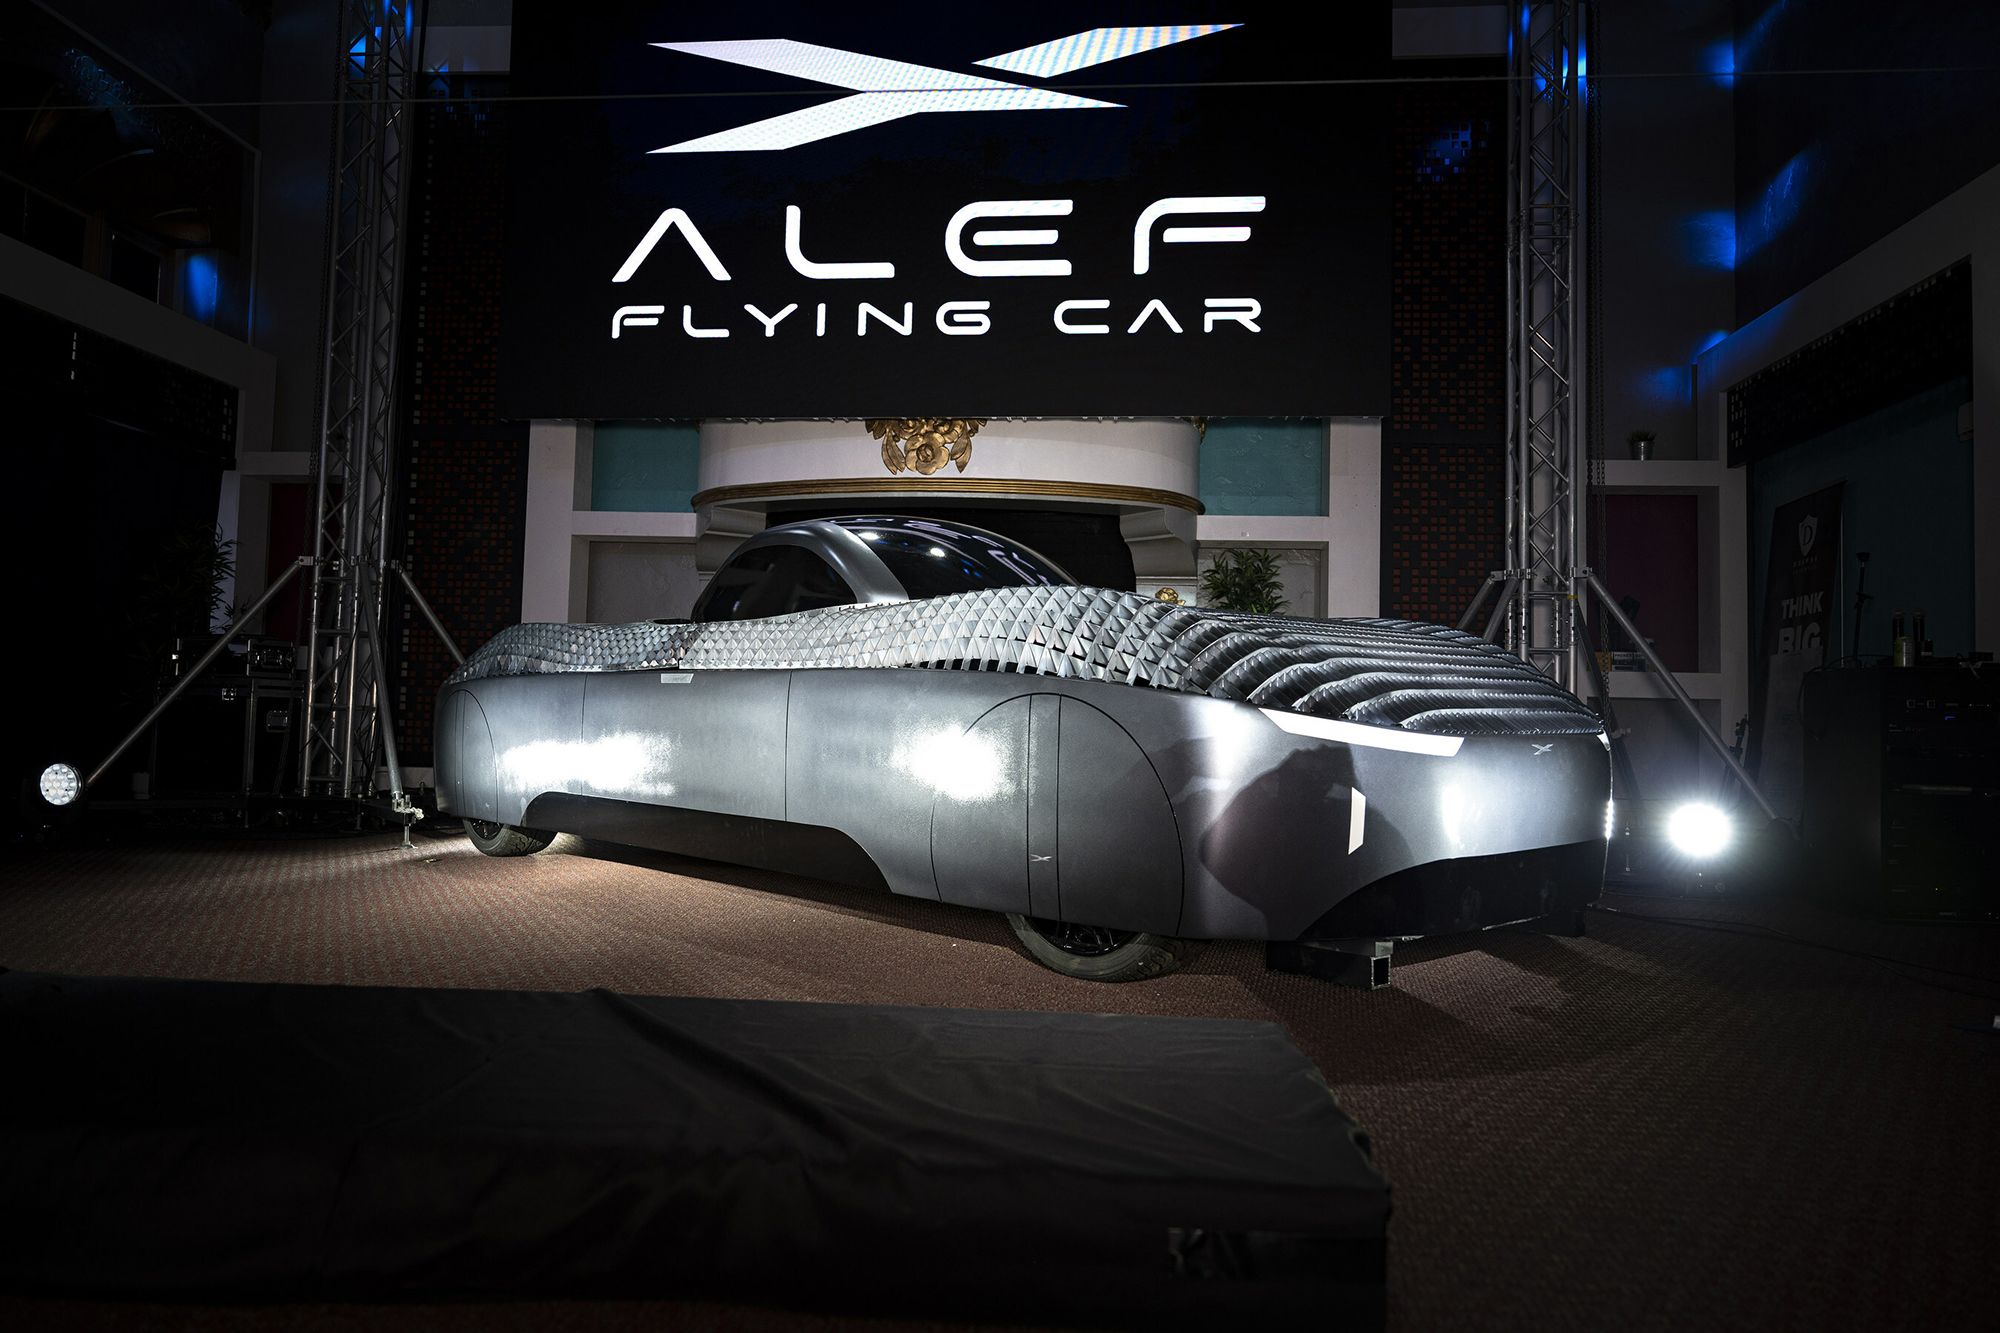 Alef Automotive's flying car prototype just got an airworthiness